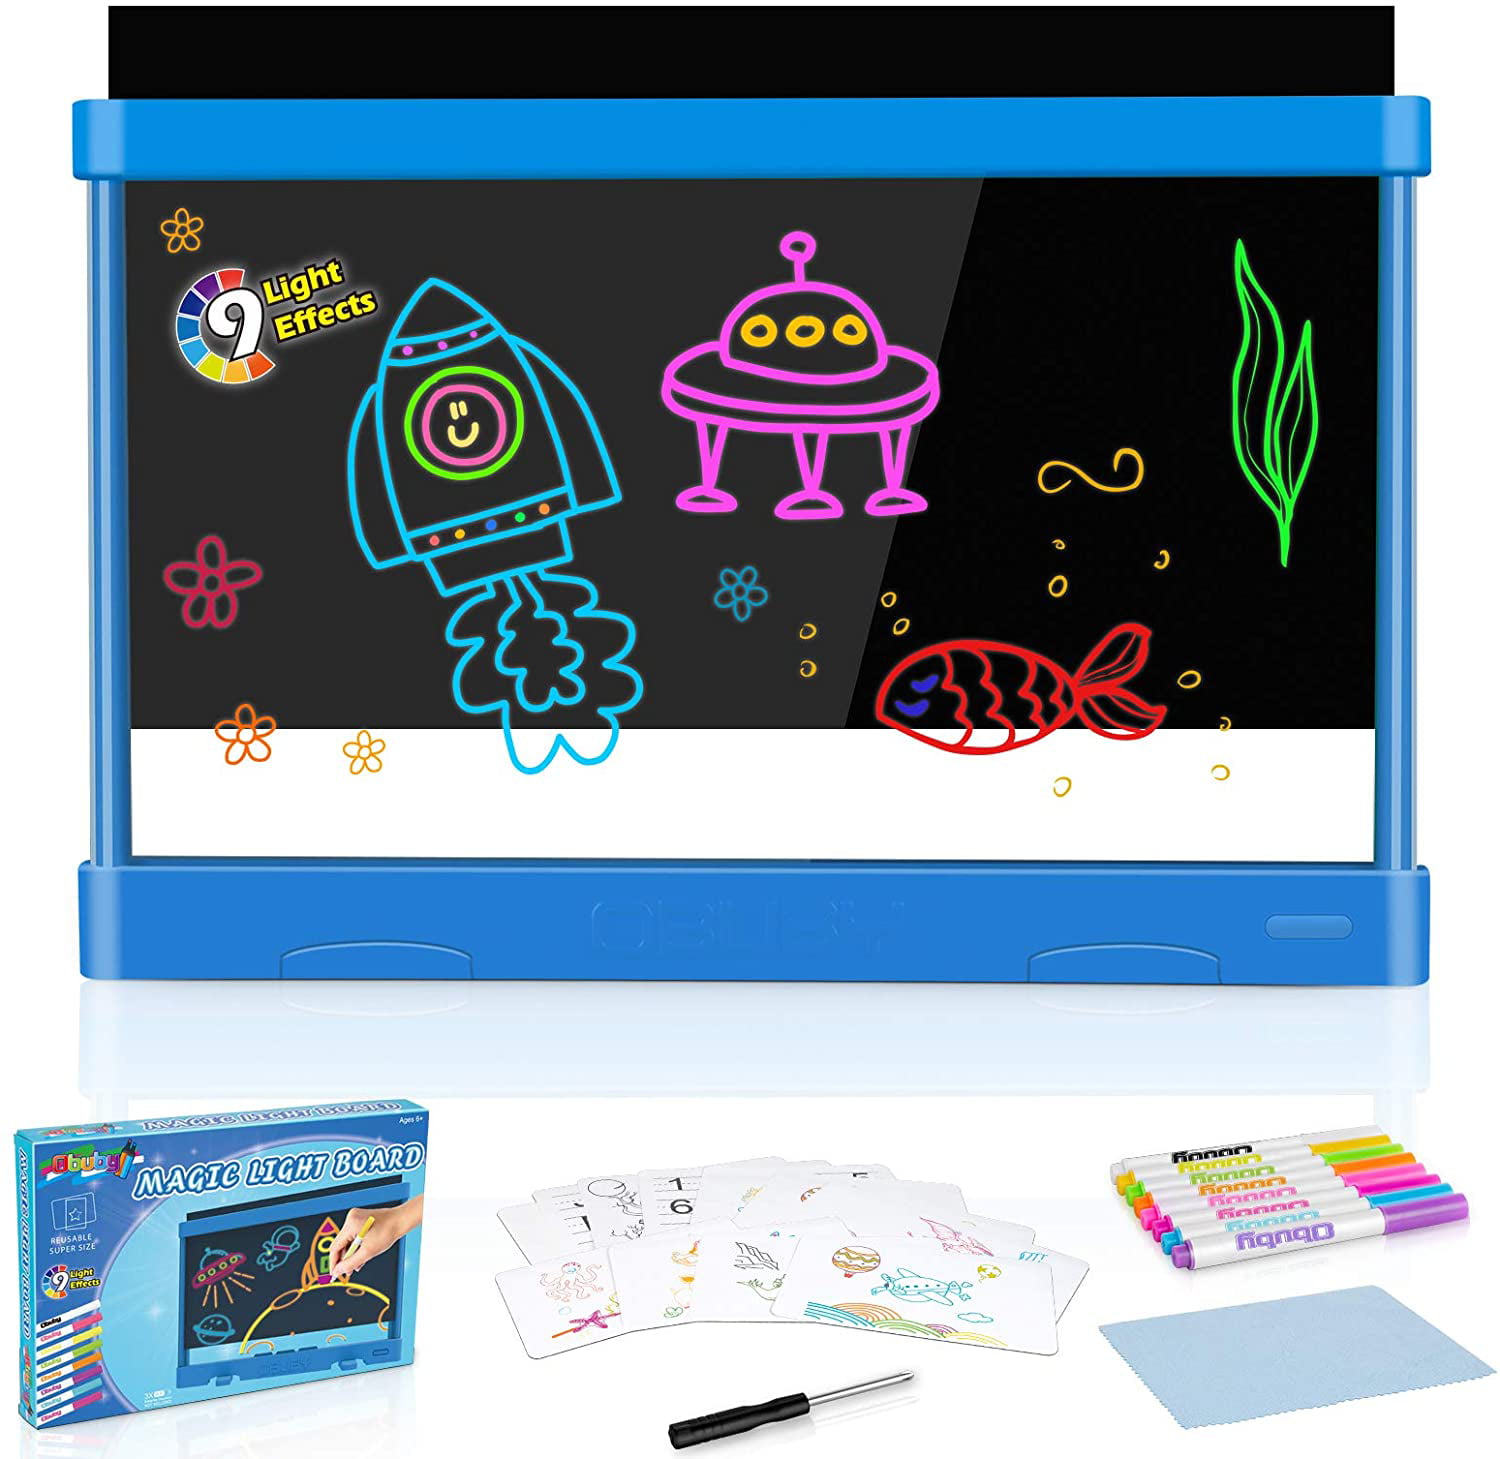 Sensory LED light up Drawing/Writing Board for special need Kids Christmas Gift 